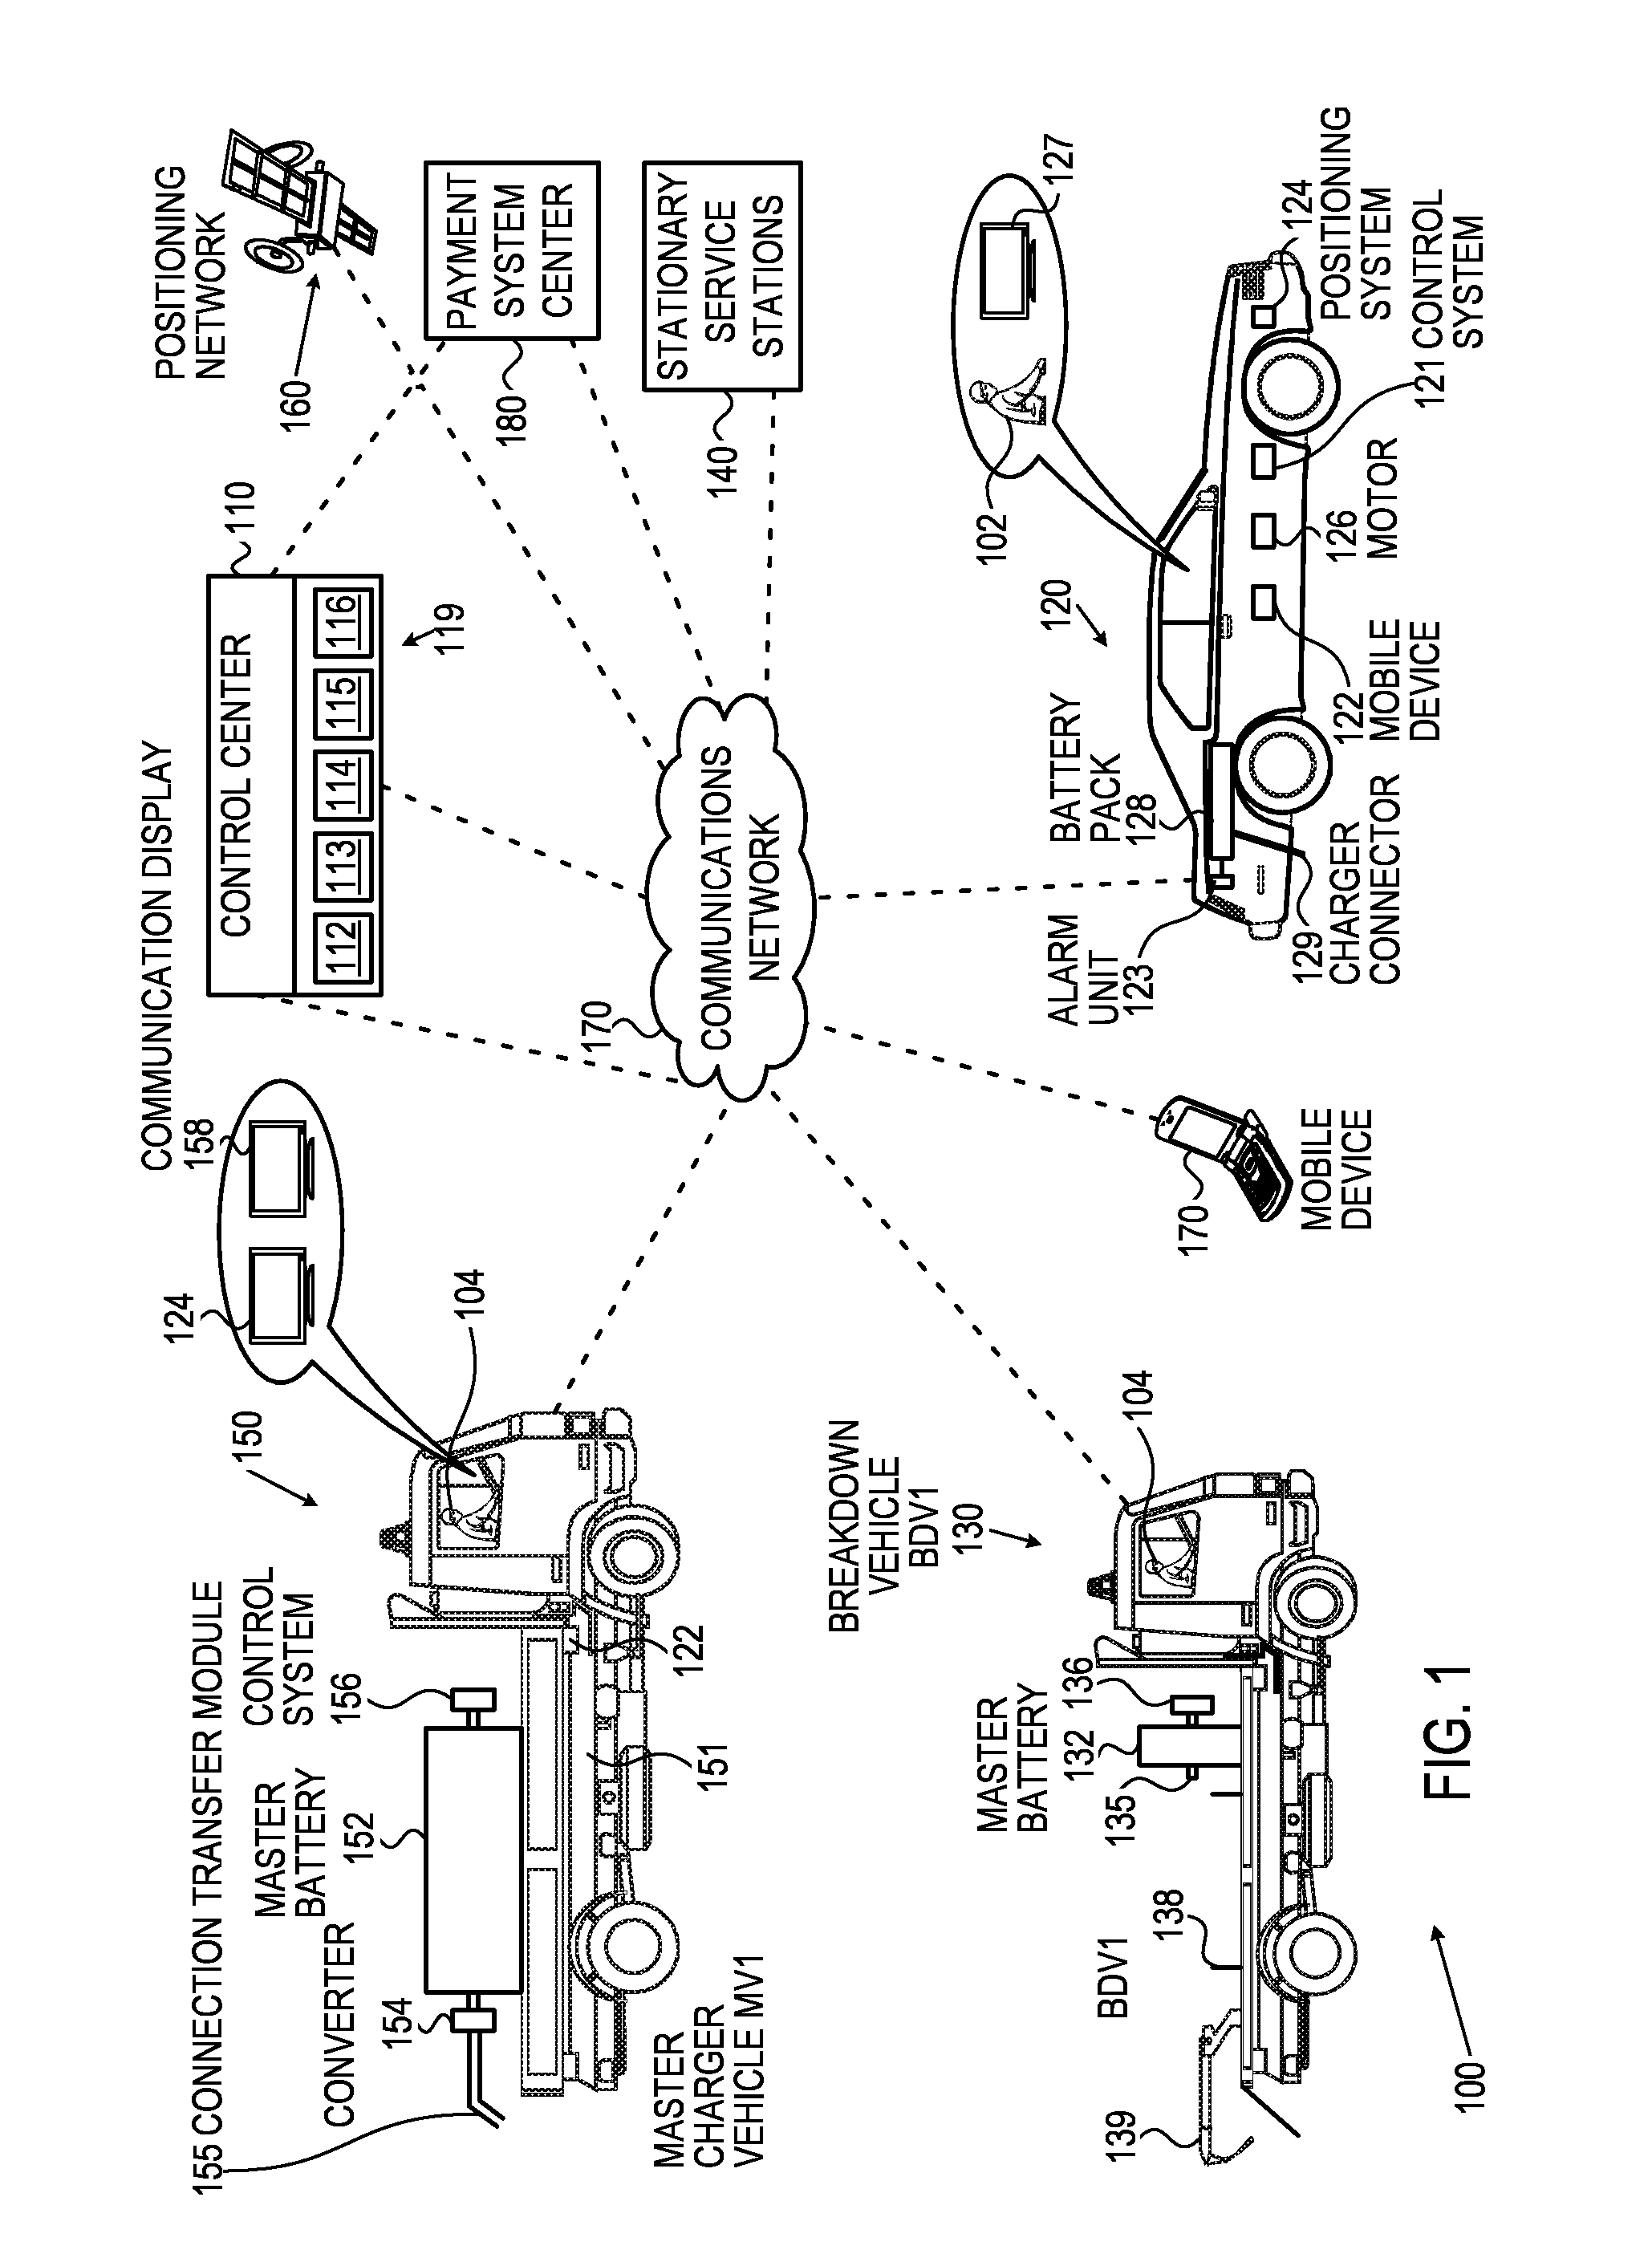 Payment system and method for provision of power to electric vehicle batteries